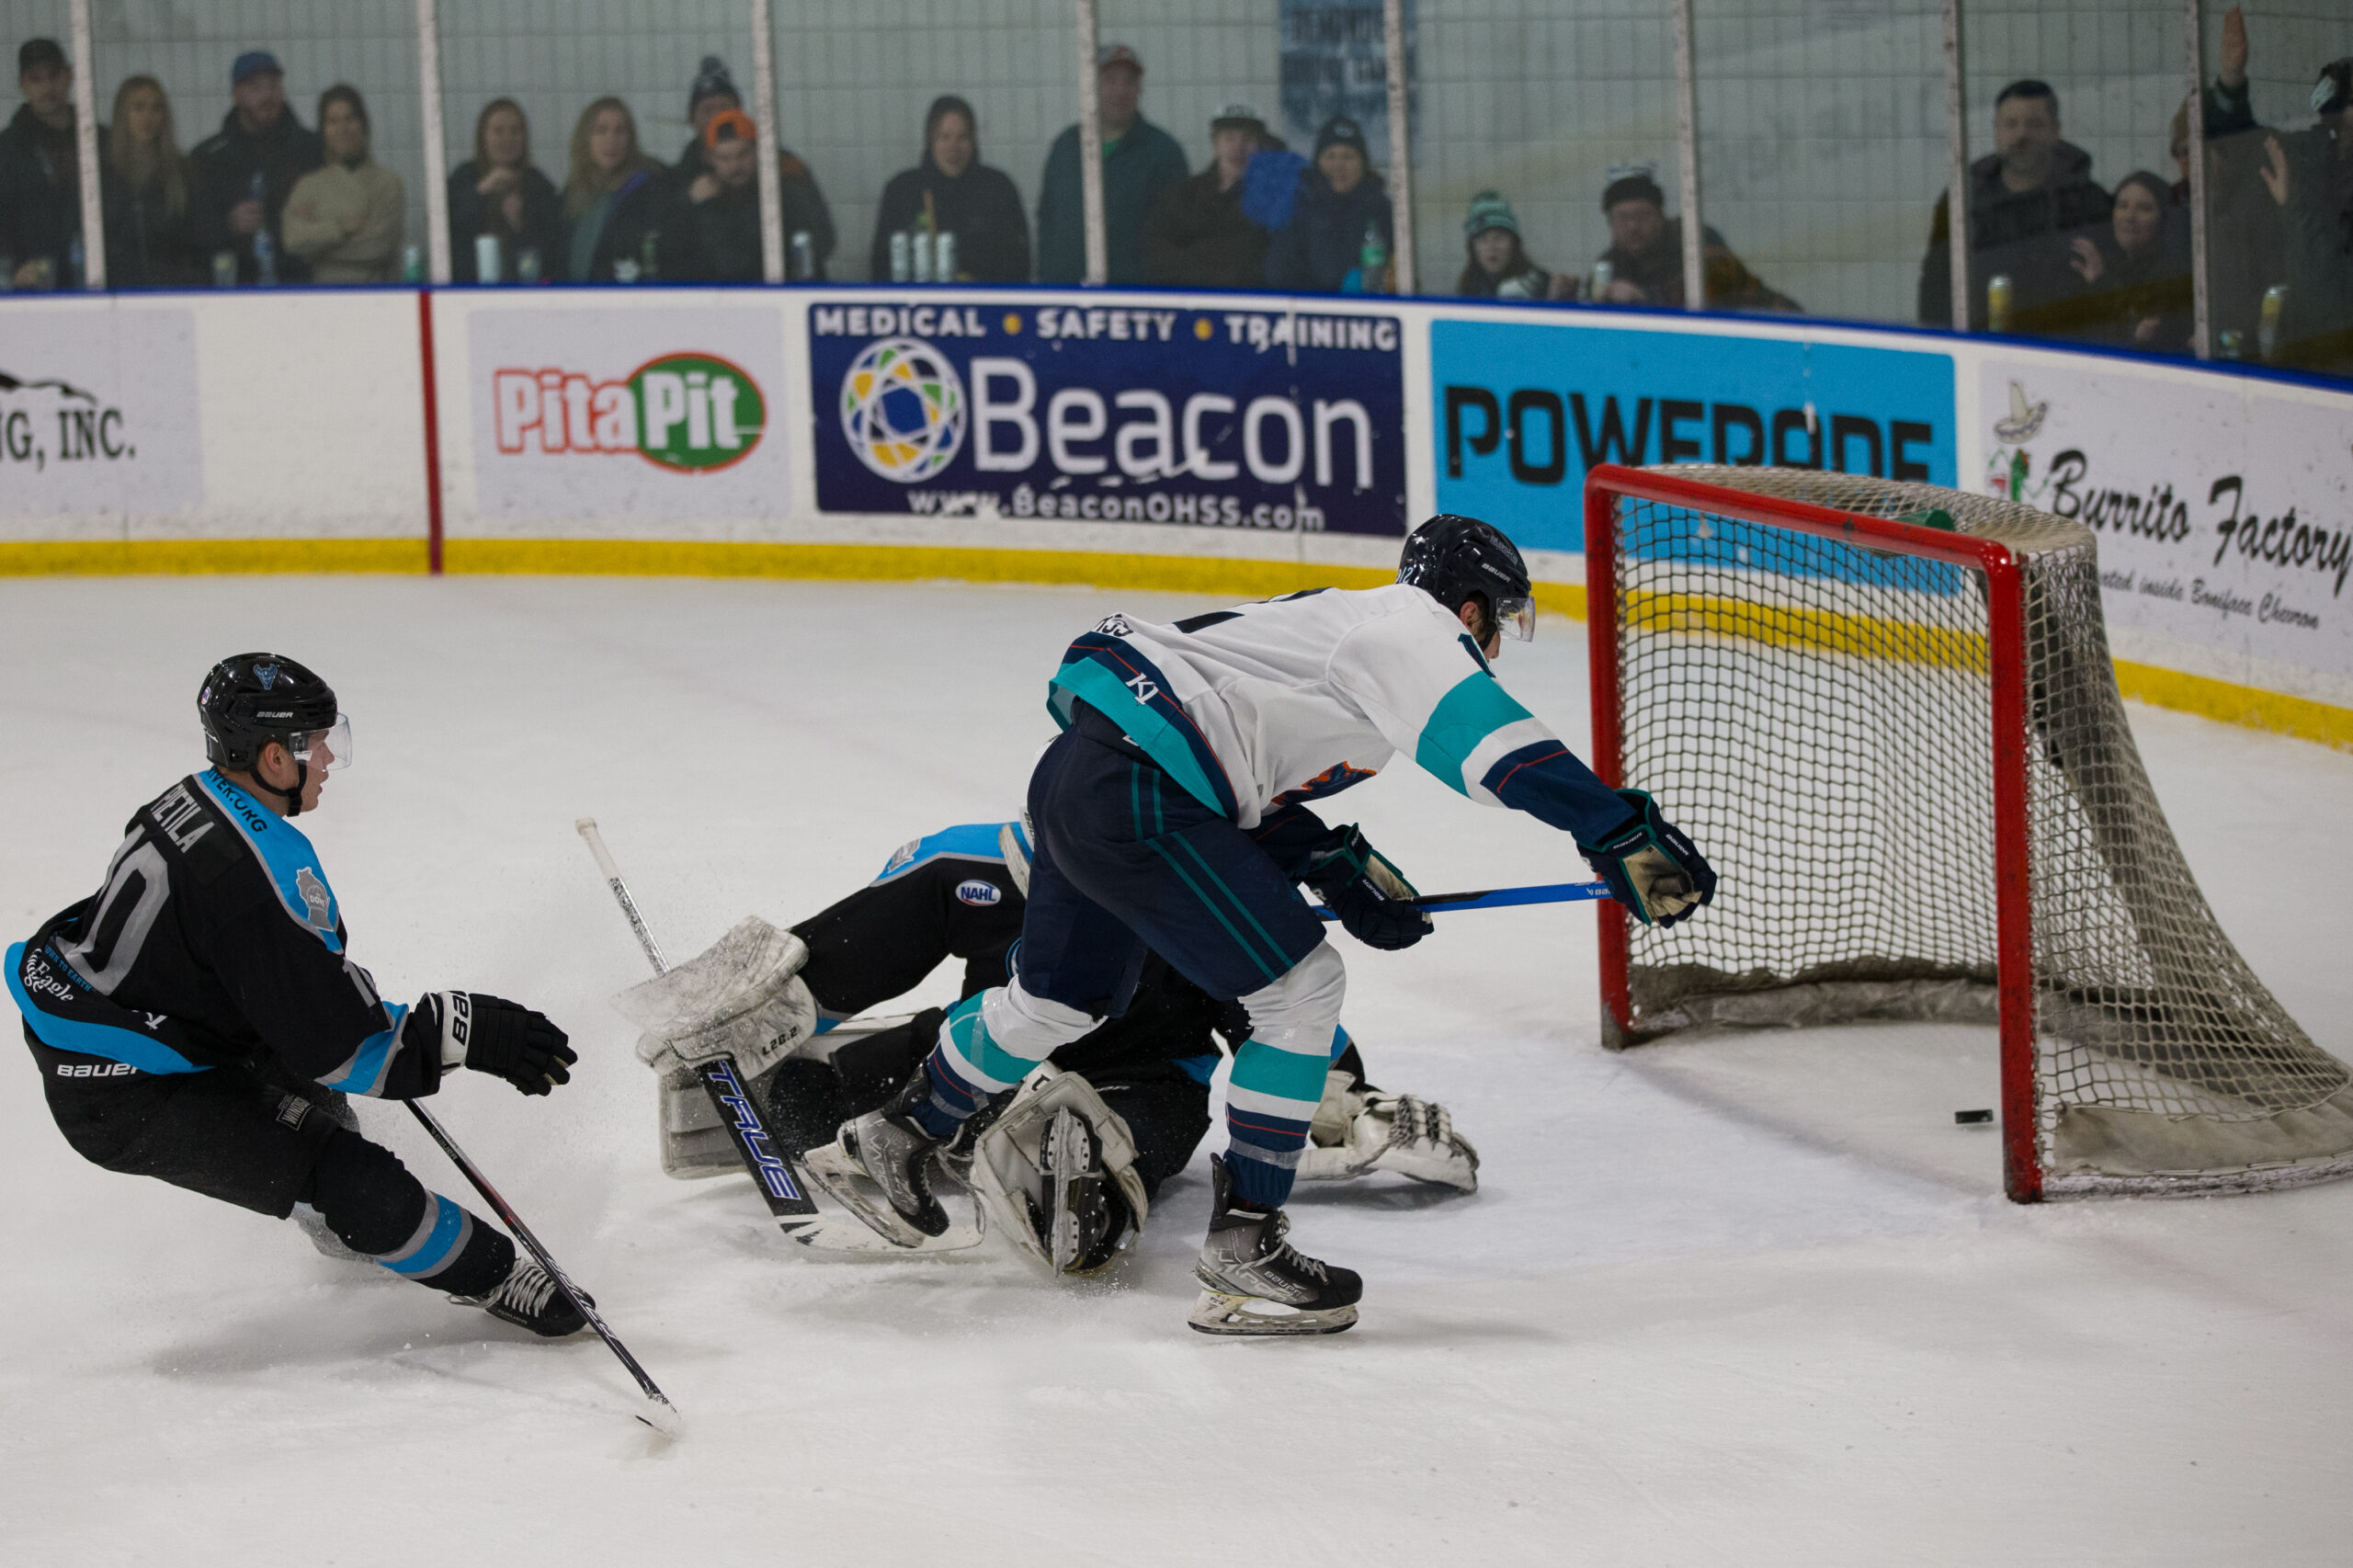 Kade Shea scoring the overtime game winning goal for the Anchorage Wolverines.